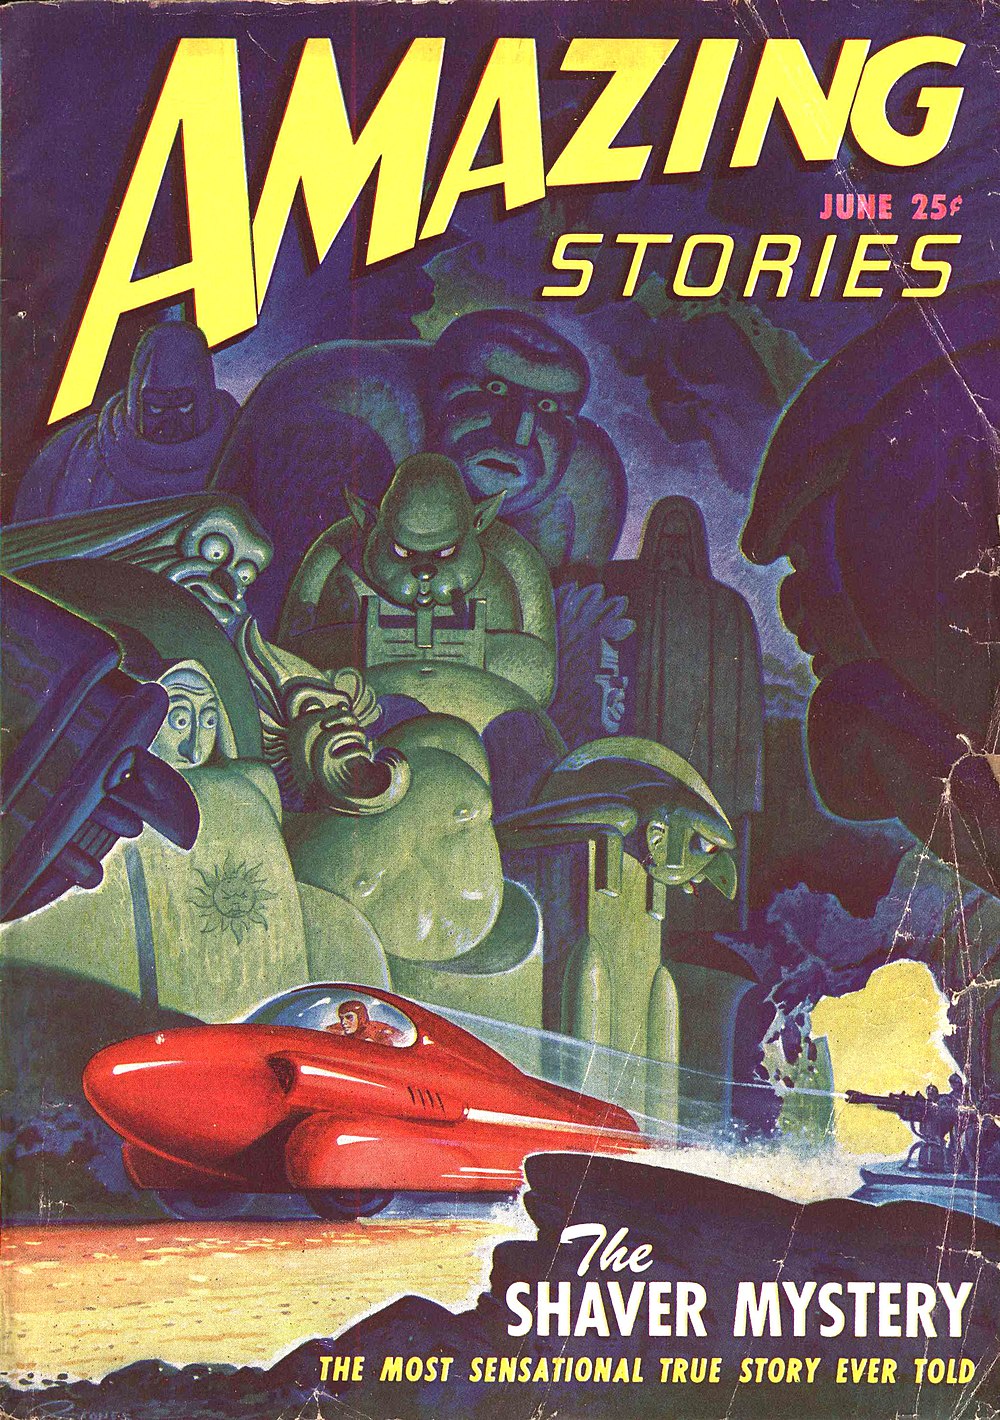 Cover of Amazing Stories (June 1947), featuring a painting of a futuristic red car driving at speed, and being shot at, against a background of large green statues in a cavern. Text reads: "Amazing Stories", "June 25¢", "The Shaver Mystery", "The most sensational true story ever told".